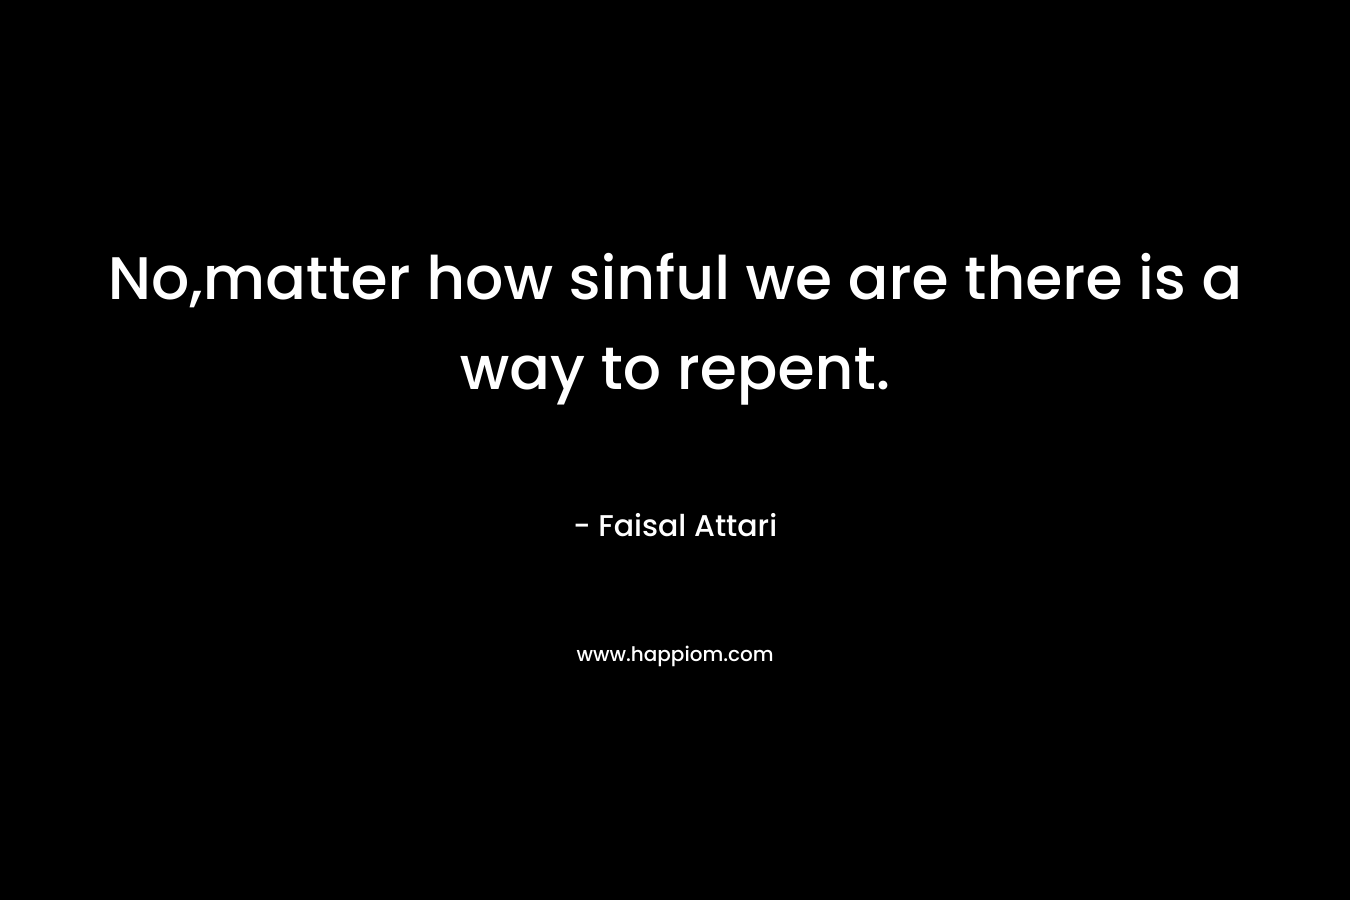 No,matter how sinful we are there is a way to repent.